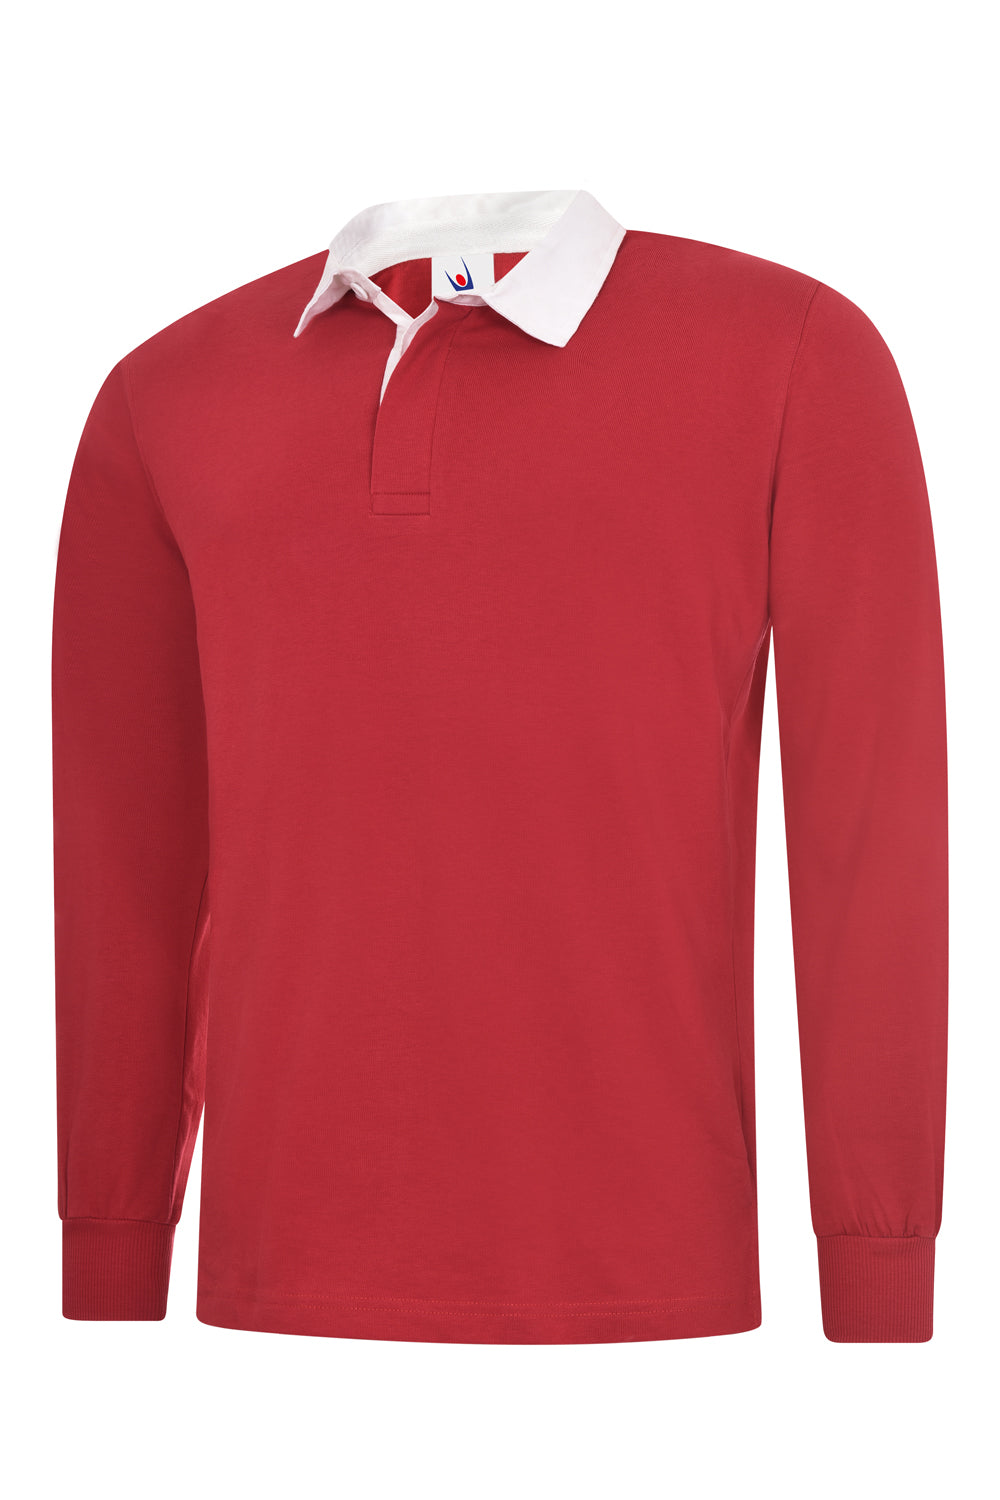 classic_rugby_shirt_red